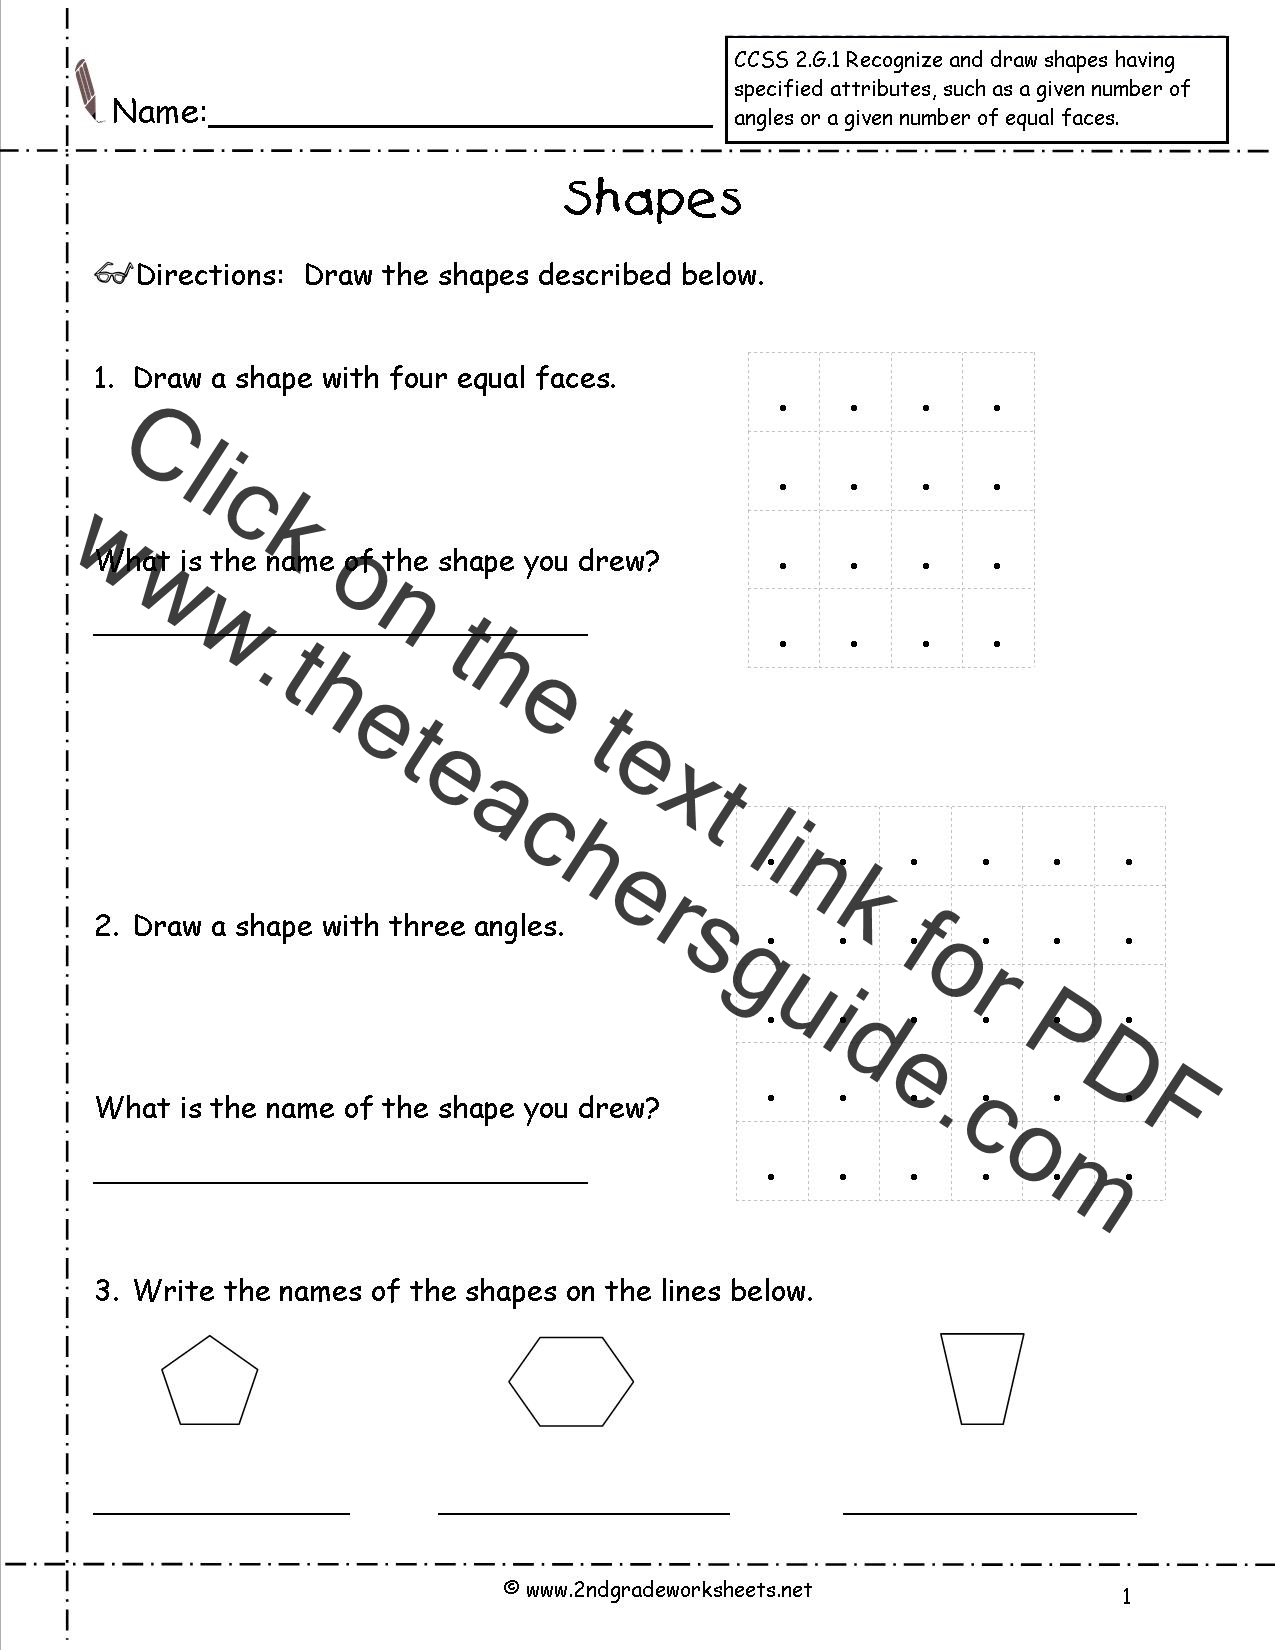 ccss-2-g-1-worksheets